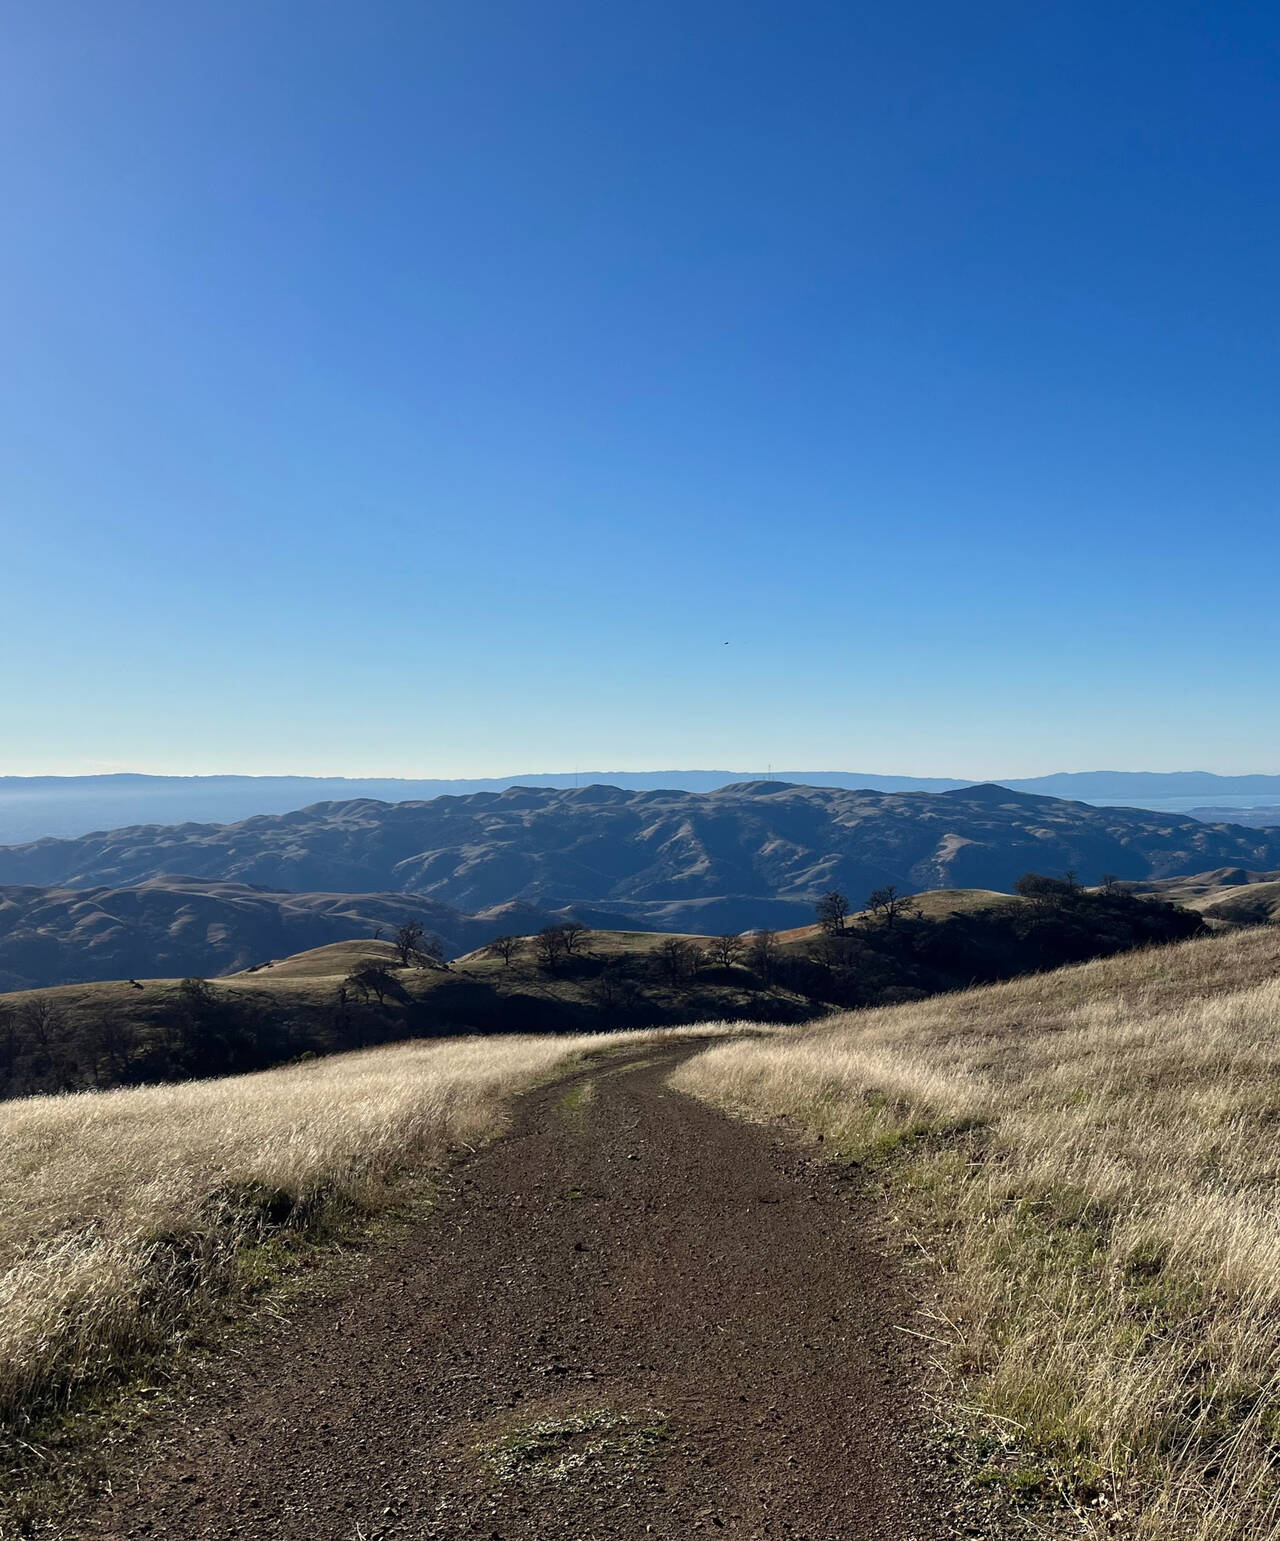 A path winds downhill into the distance. Mission Peak is visible on the horizon.